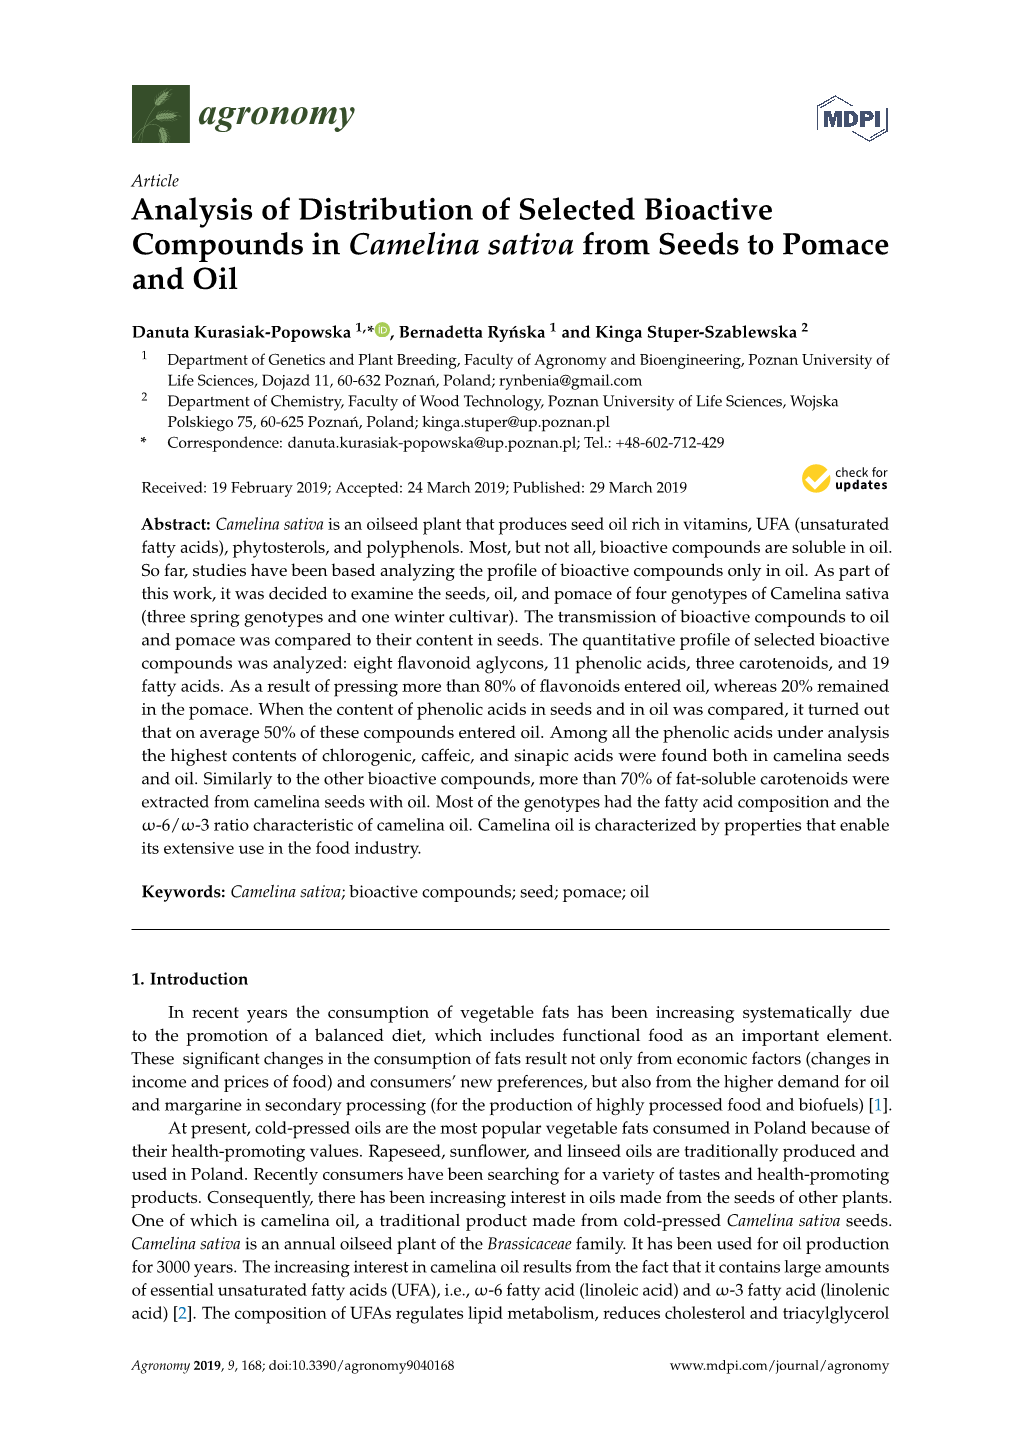 Analysis of Distribution of Selected Bioactive Compounds in Camelina Sativa from Seeds to Pomace and Oil